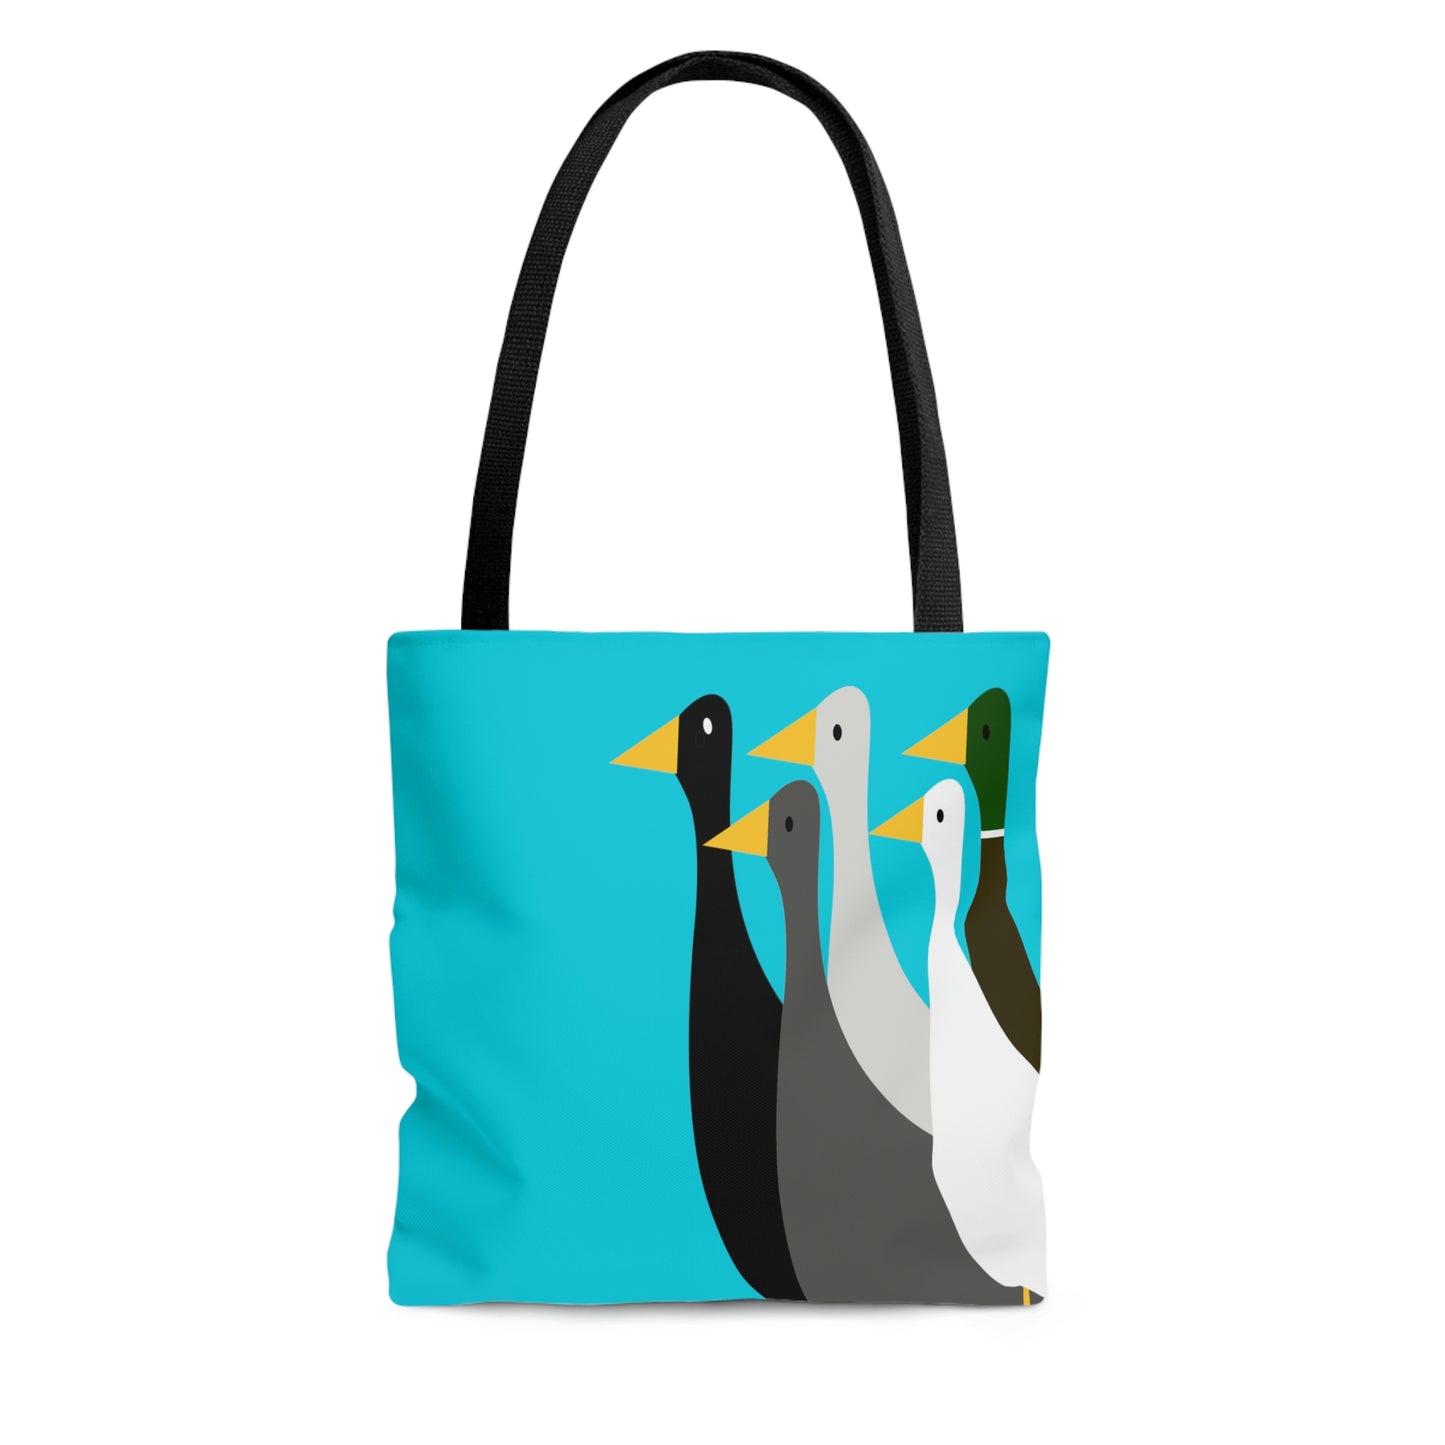 Take the ducks with you - dark turquoise 00d0e3  - Tote Bag